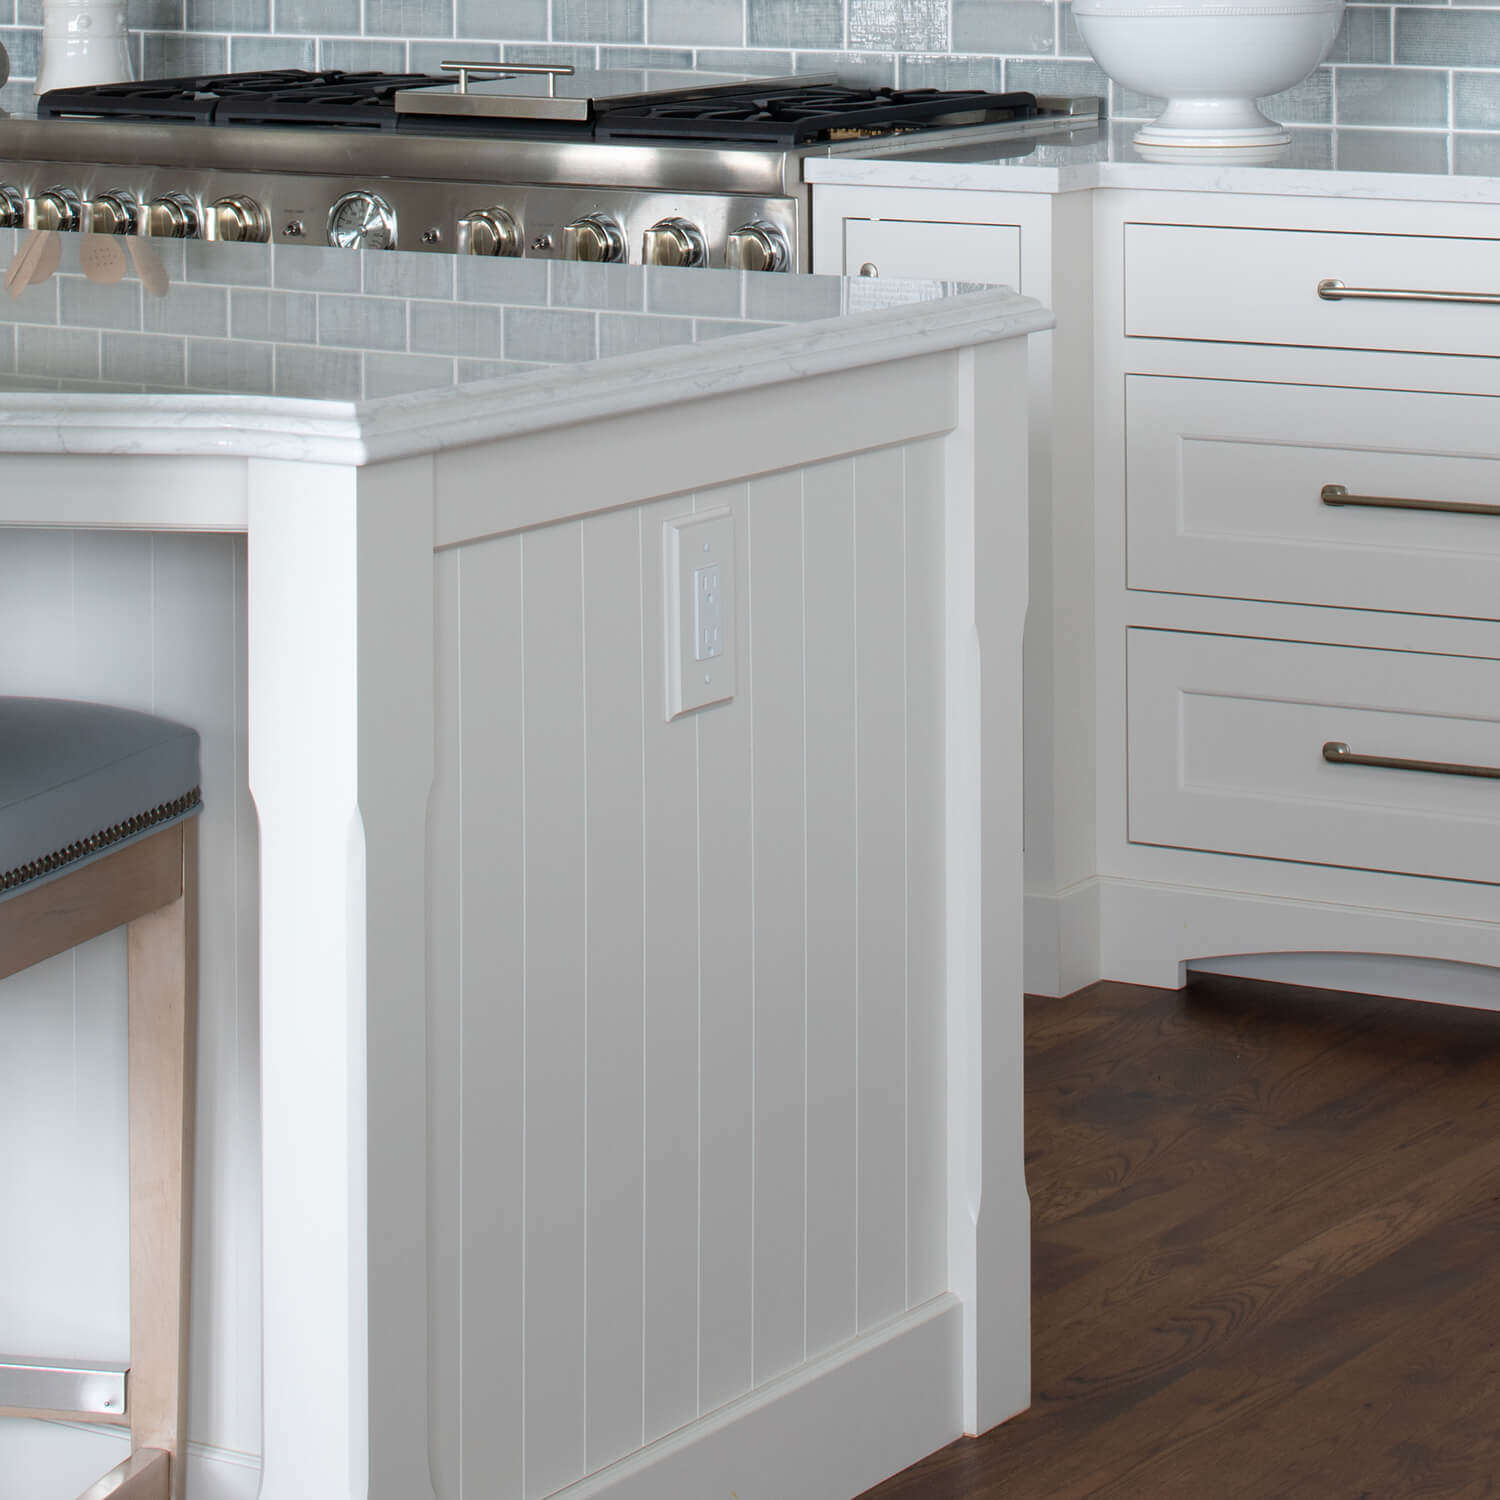 A coastal style kitchen island end cap with v-groove panel that looks like shiplap shown in a white paint color.